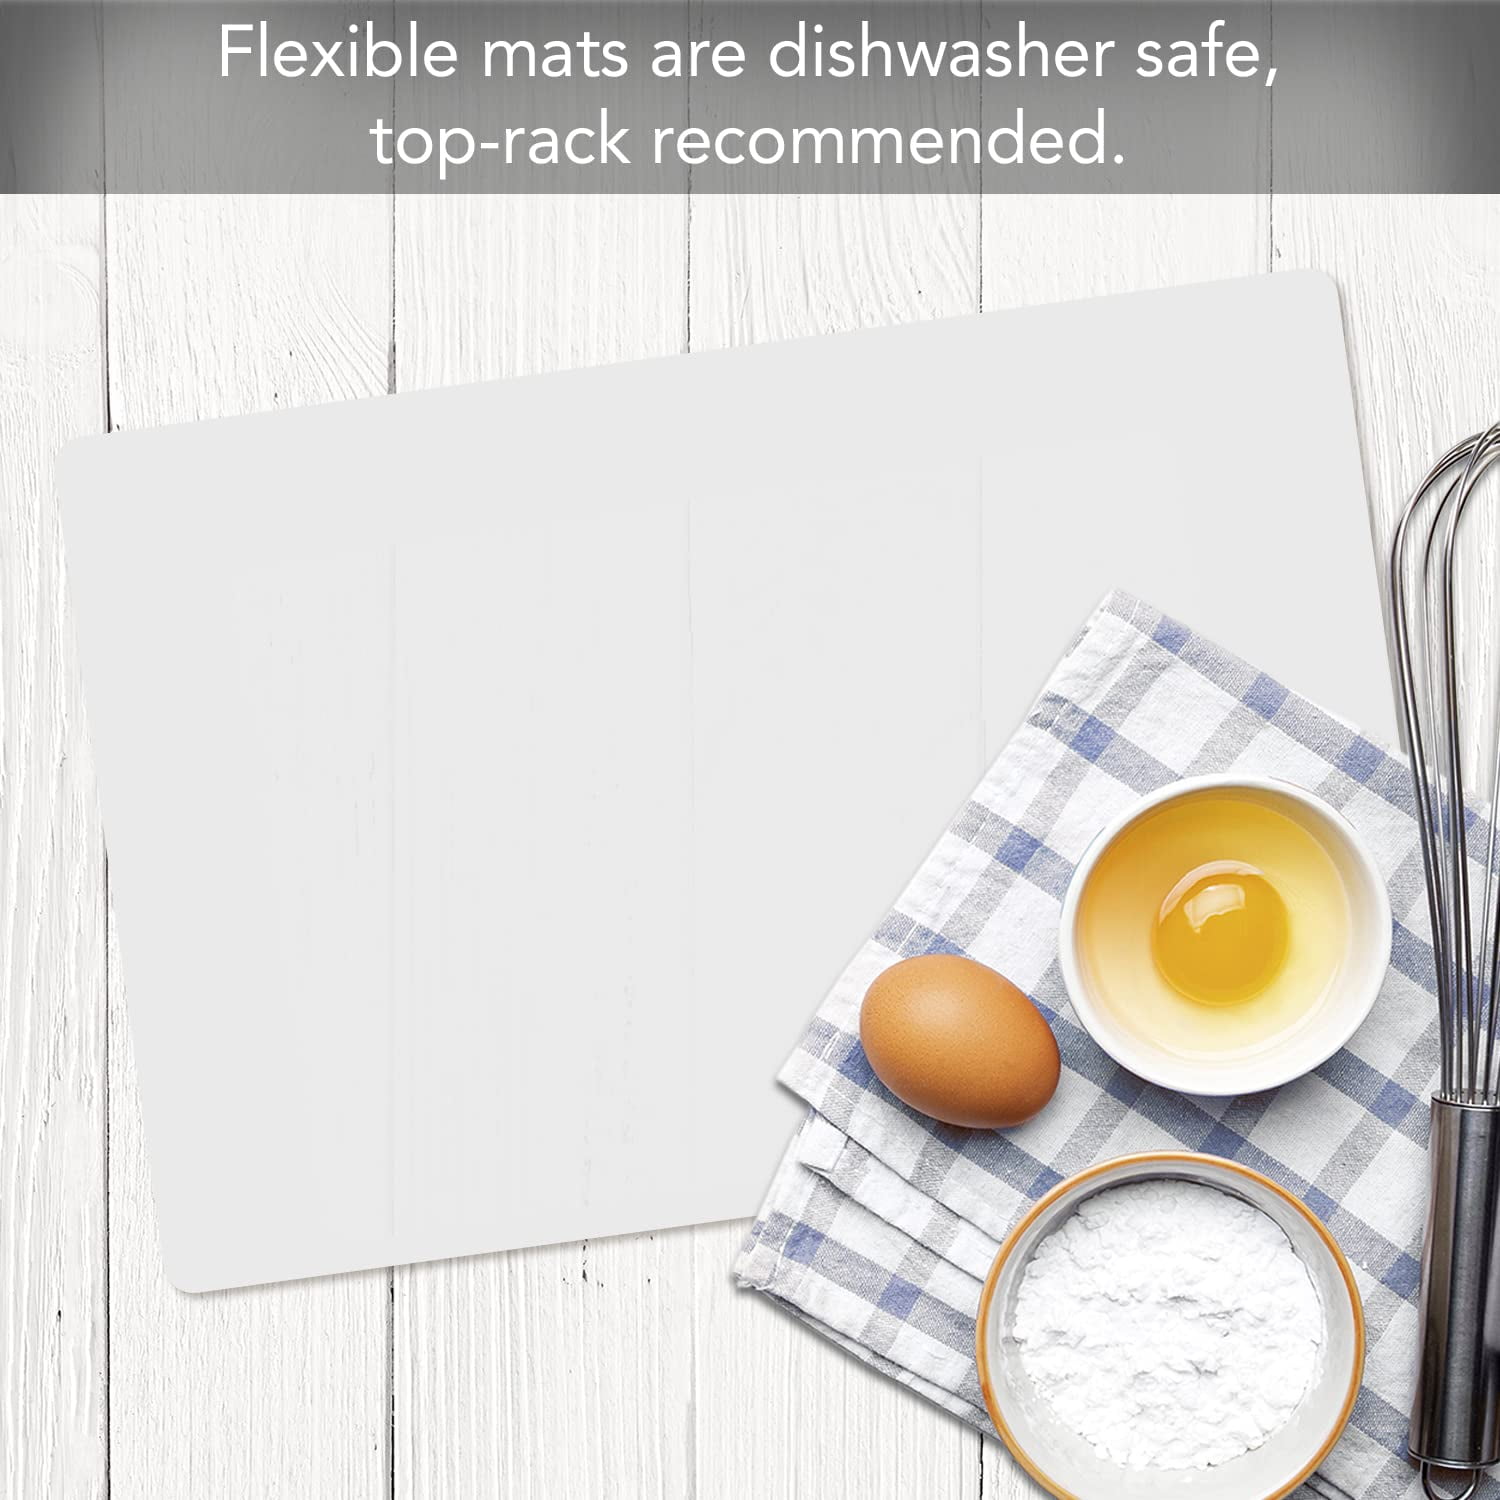 Chop Chop Made in The USA Food Service Grade Flexible Cutting Mats (Set of 4) 9 by 12 inch - Clear